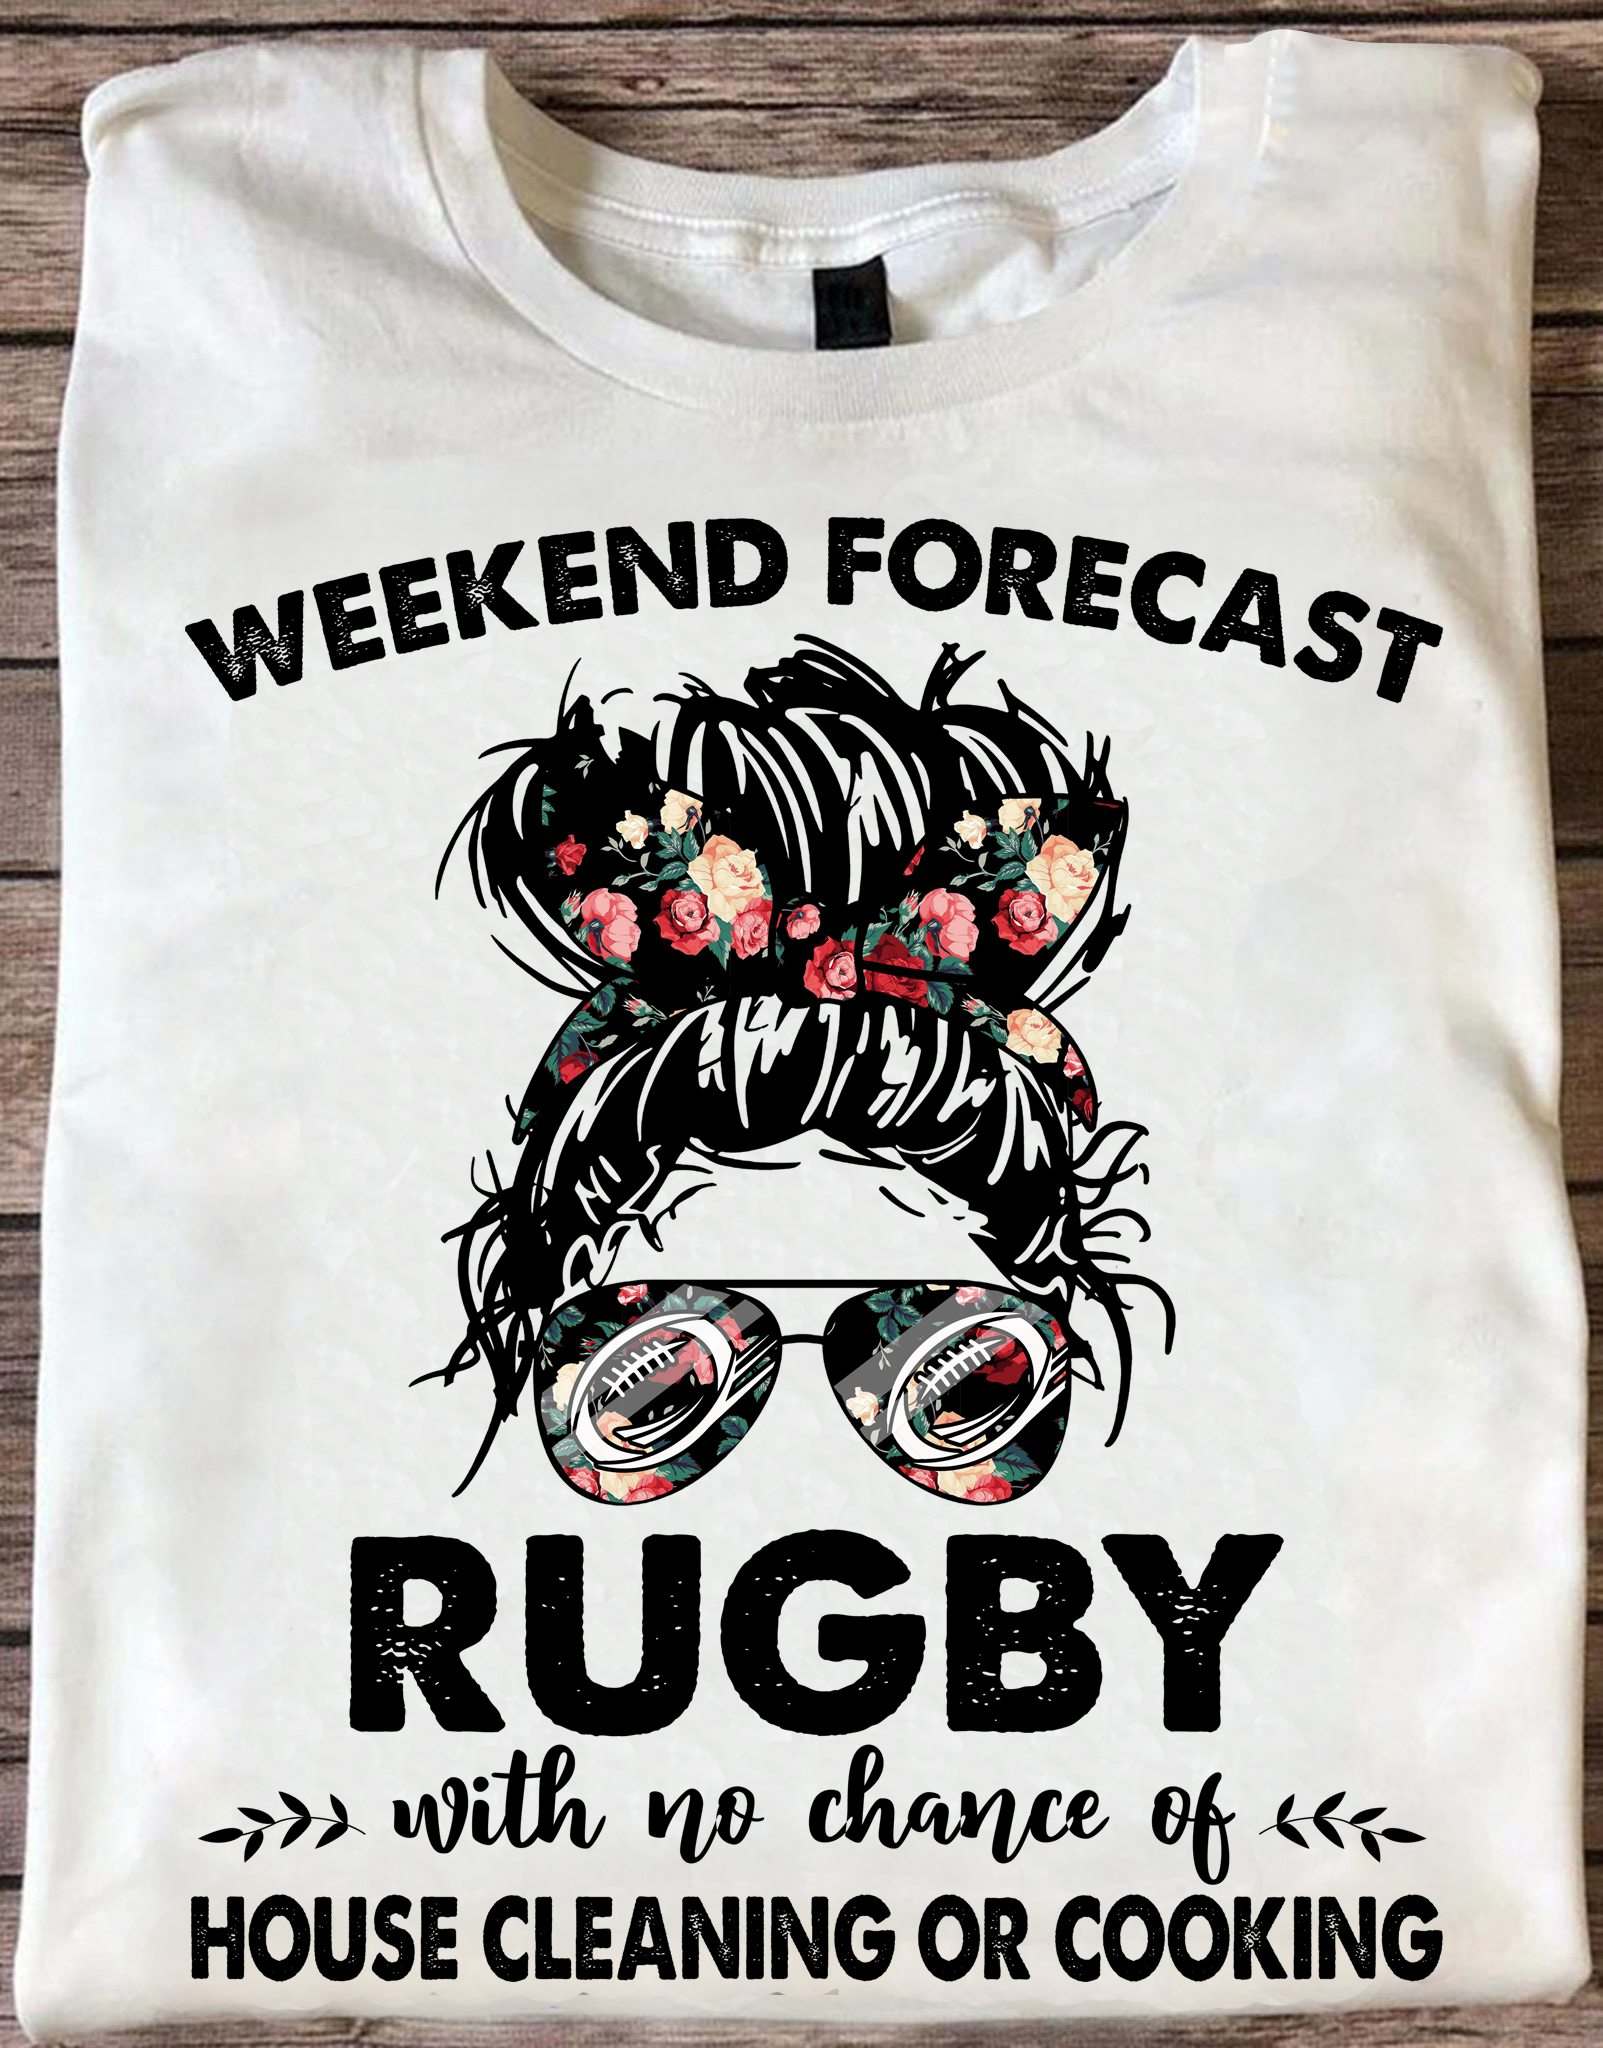 Weekend forecast rugby with no chance of house cleaning or cooking